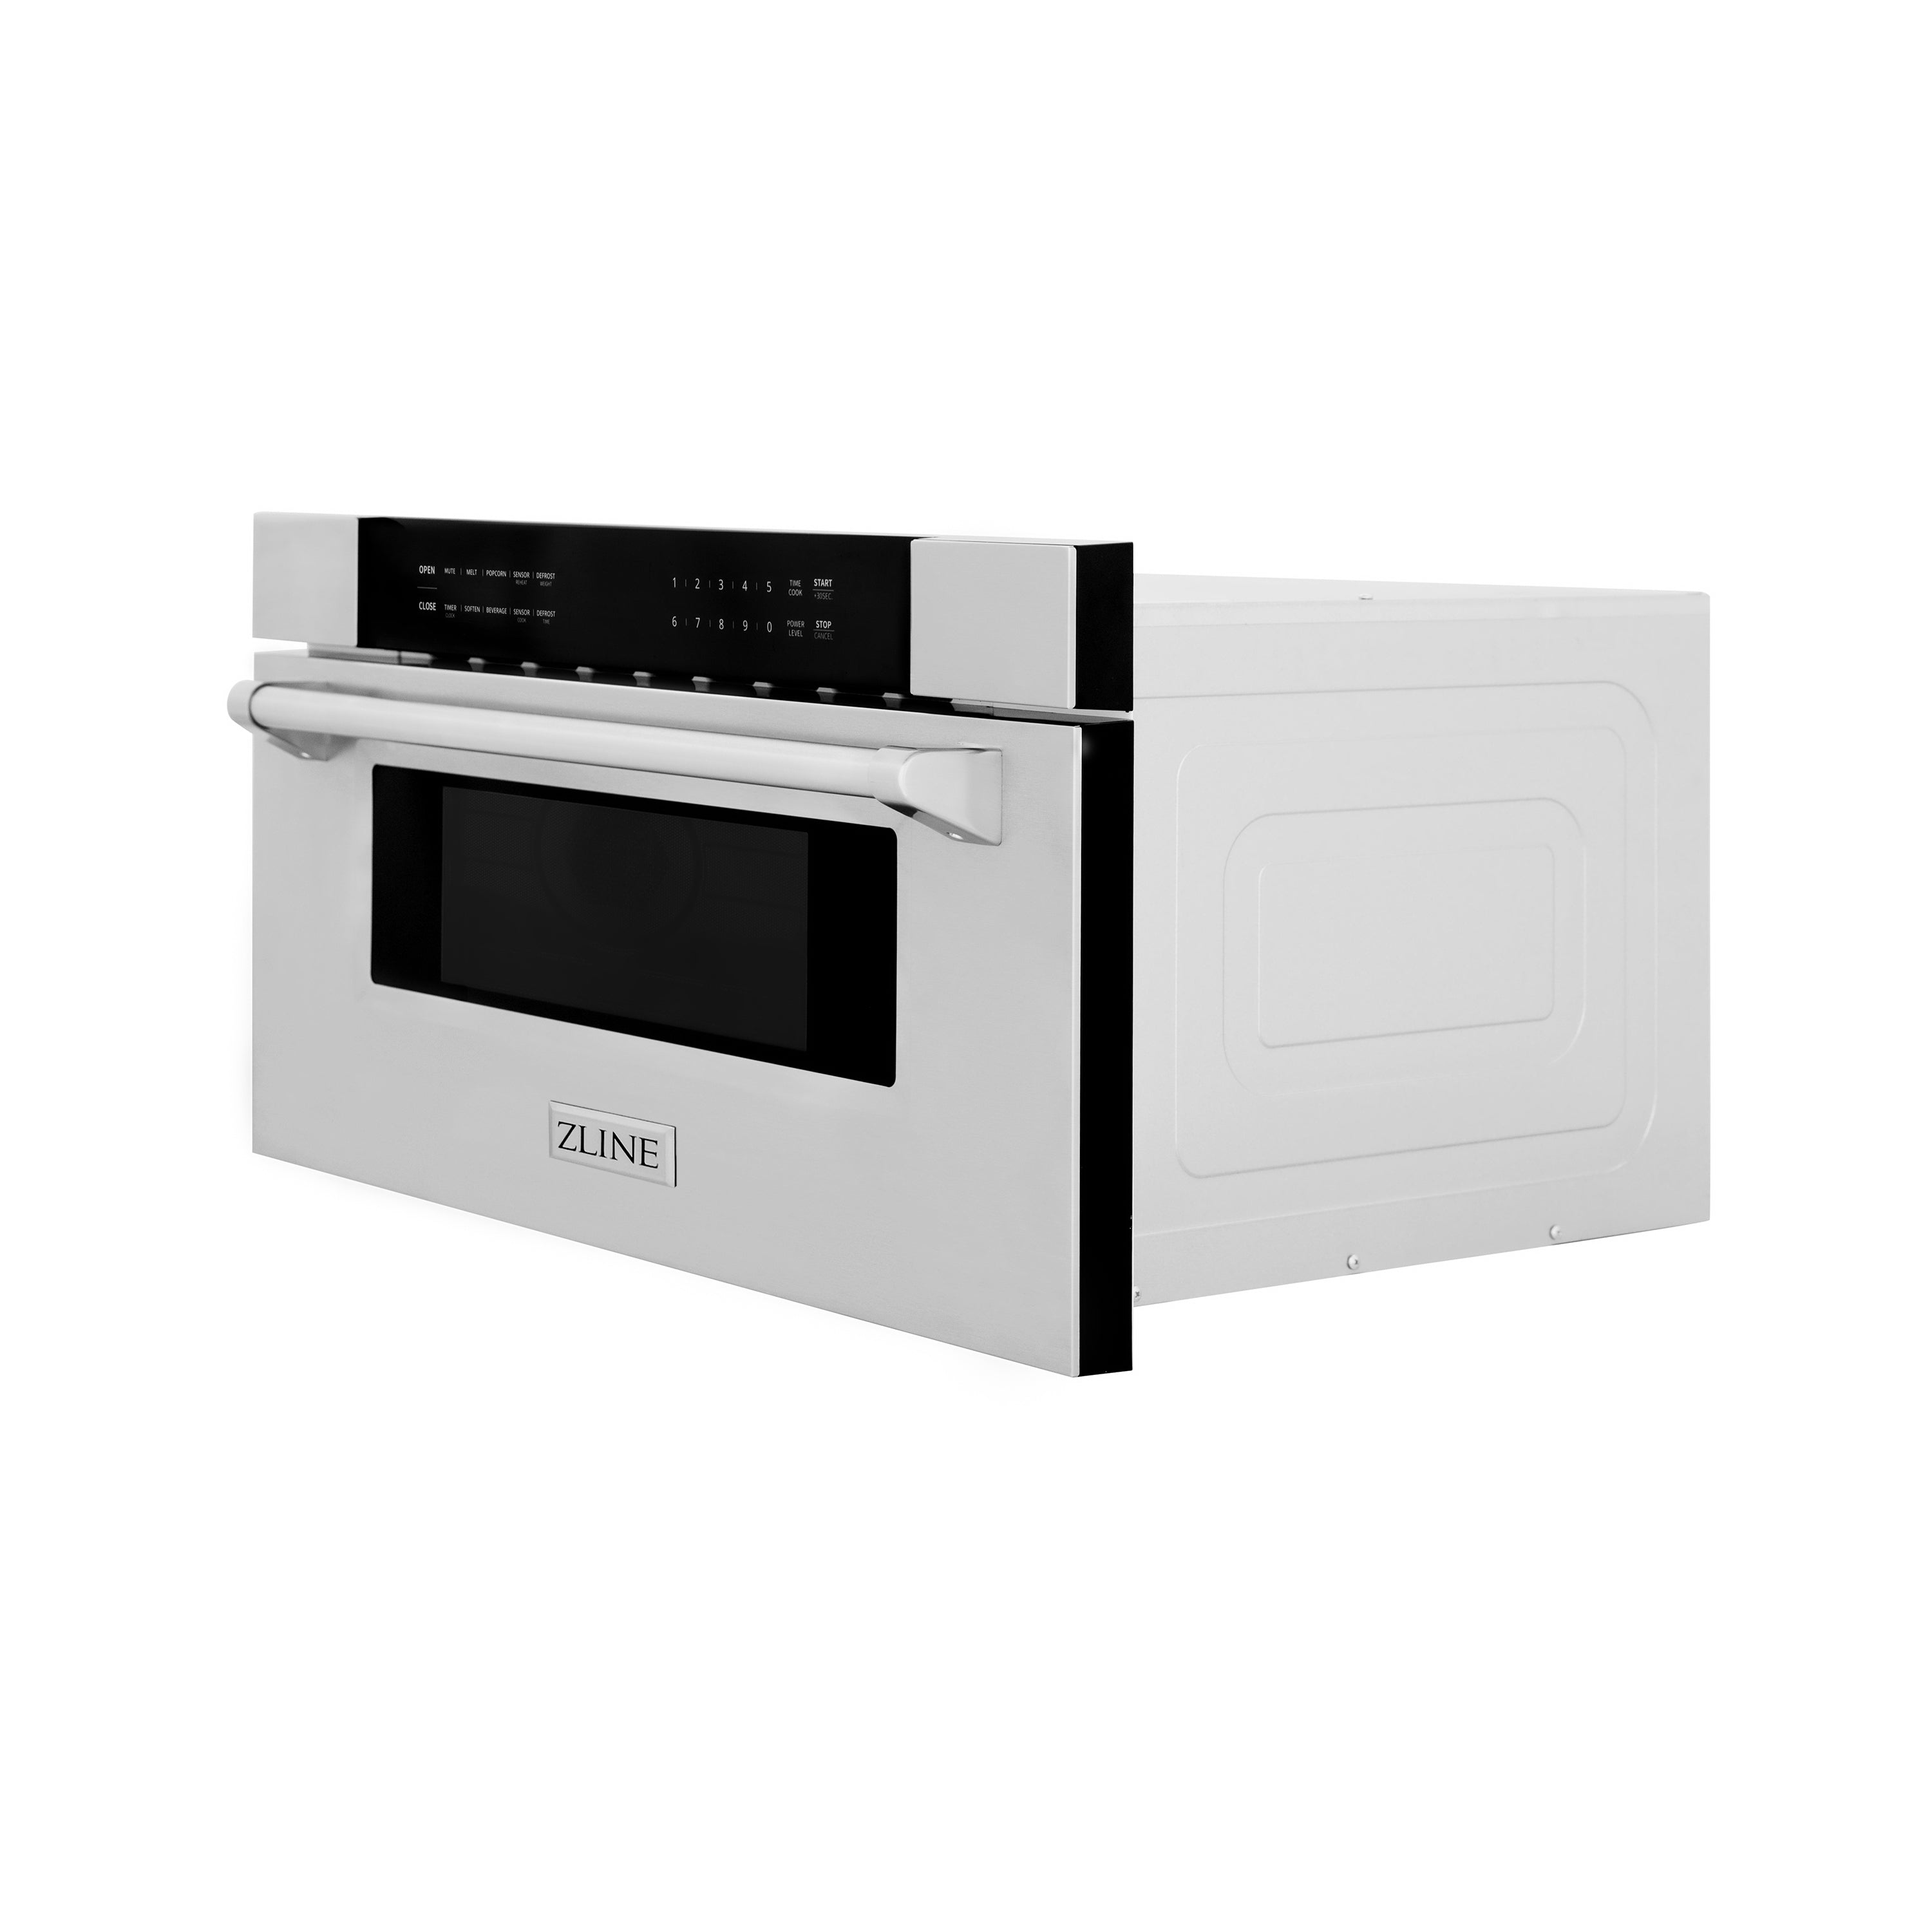 ZLINE 30 in. 1.2 cu. ft. Stainless Steel Built-In Microwave Drawer (MWD-30) Side View Drawer Closed